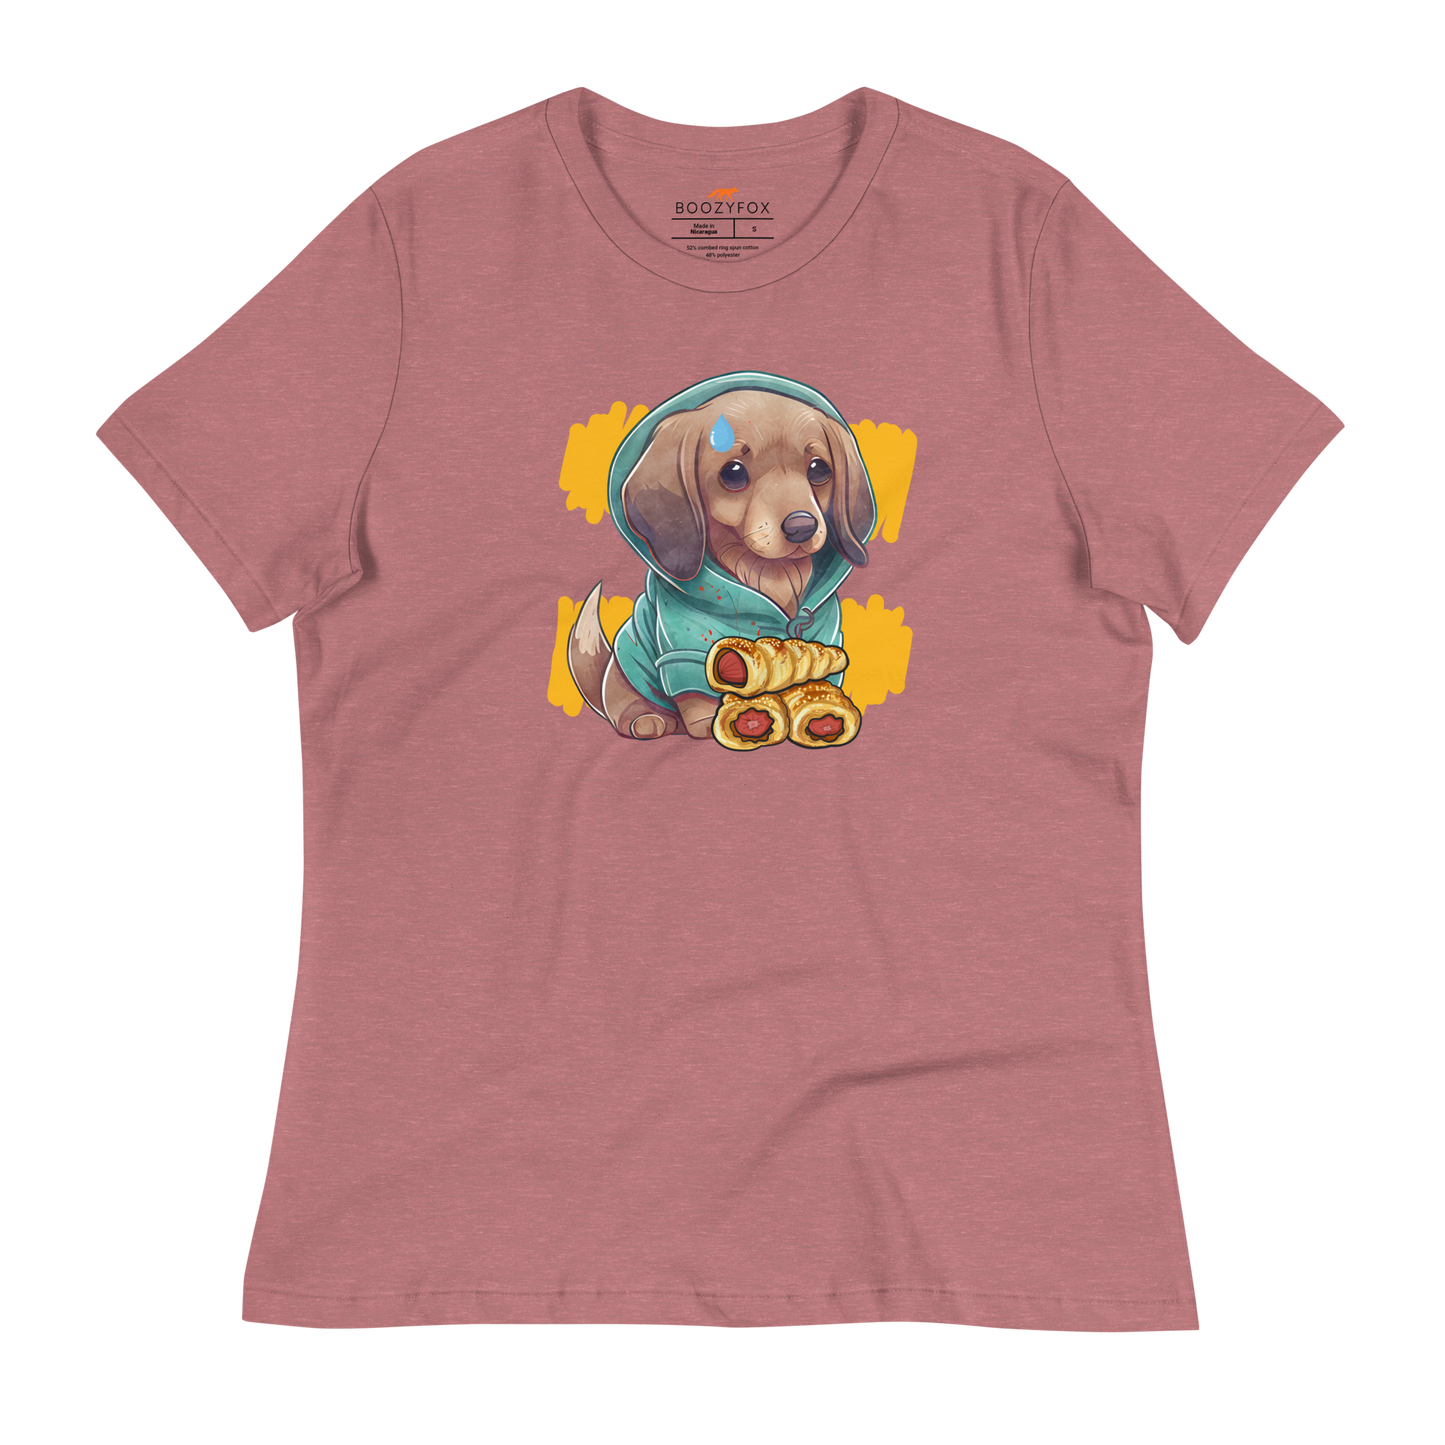 Women's relaxed heather mauve Sausage Dog t-shirt featuring an adorable dachshund sausage dog graphic on the chest - Women's Cute Graphic Dachshund Tees - Boozy Fox